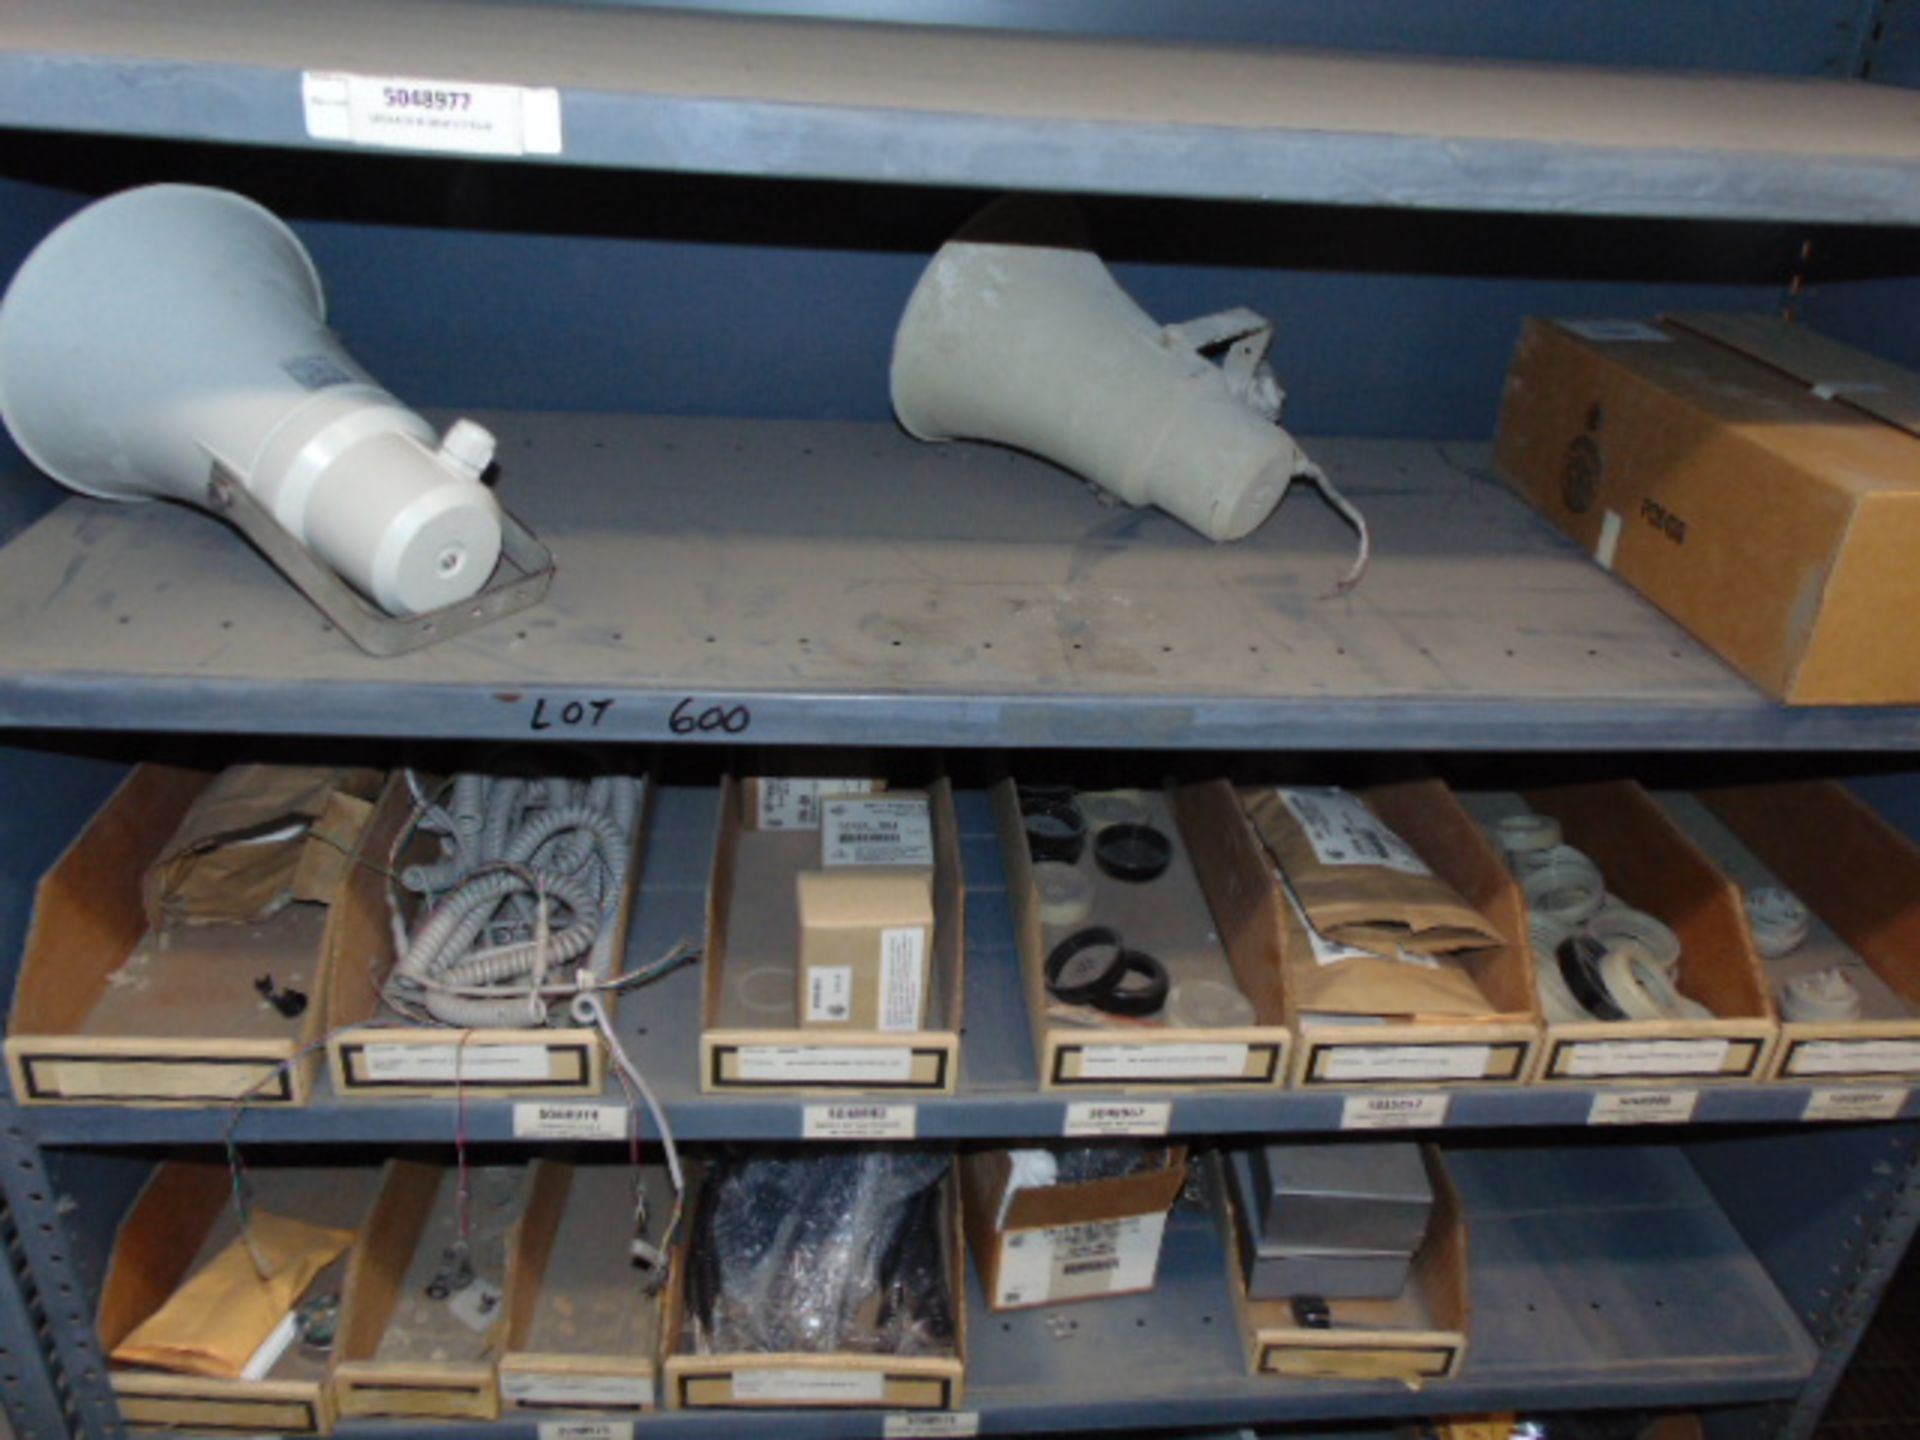 LOT CONSISTING OF: A & B control AC modules, A & B controllers, assorted cables & misc., assorted ( - Image 6 of 7